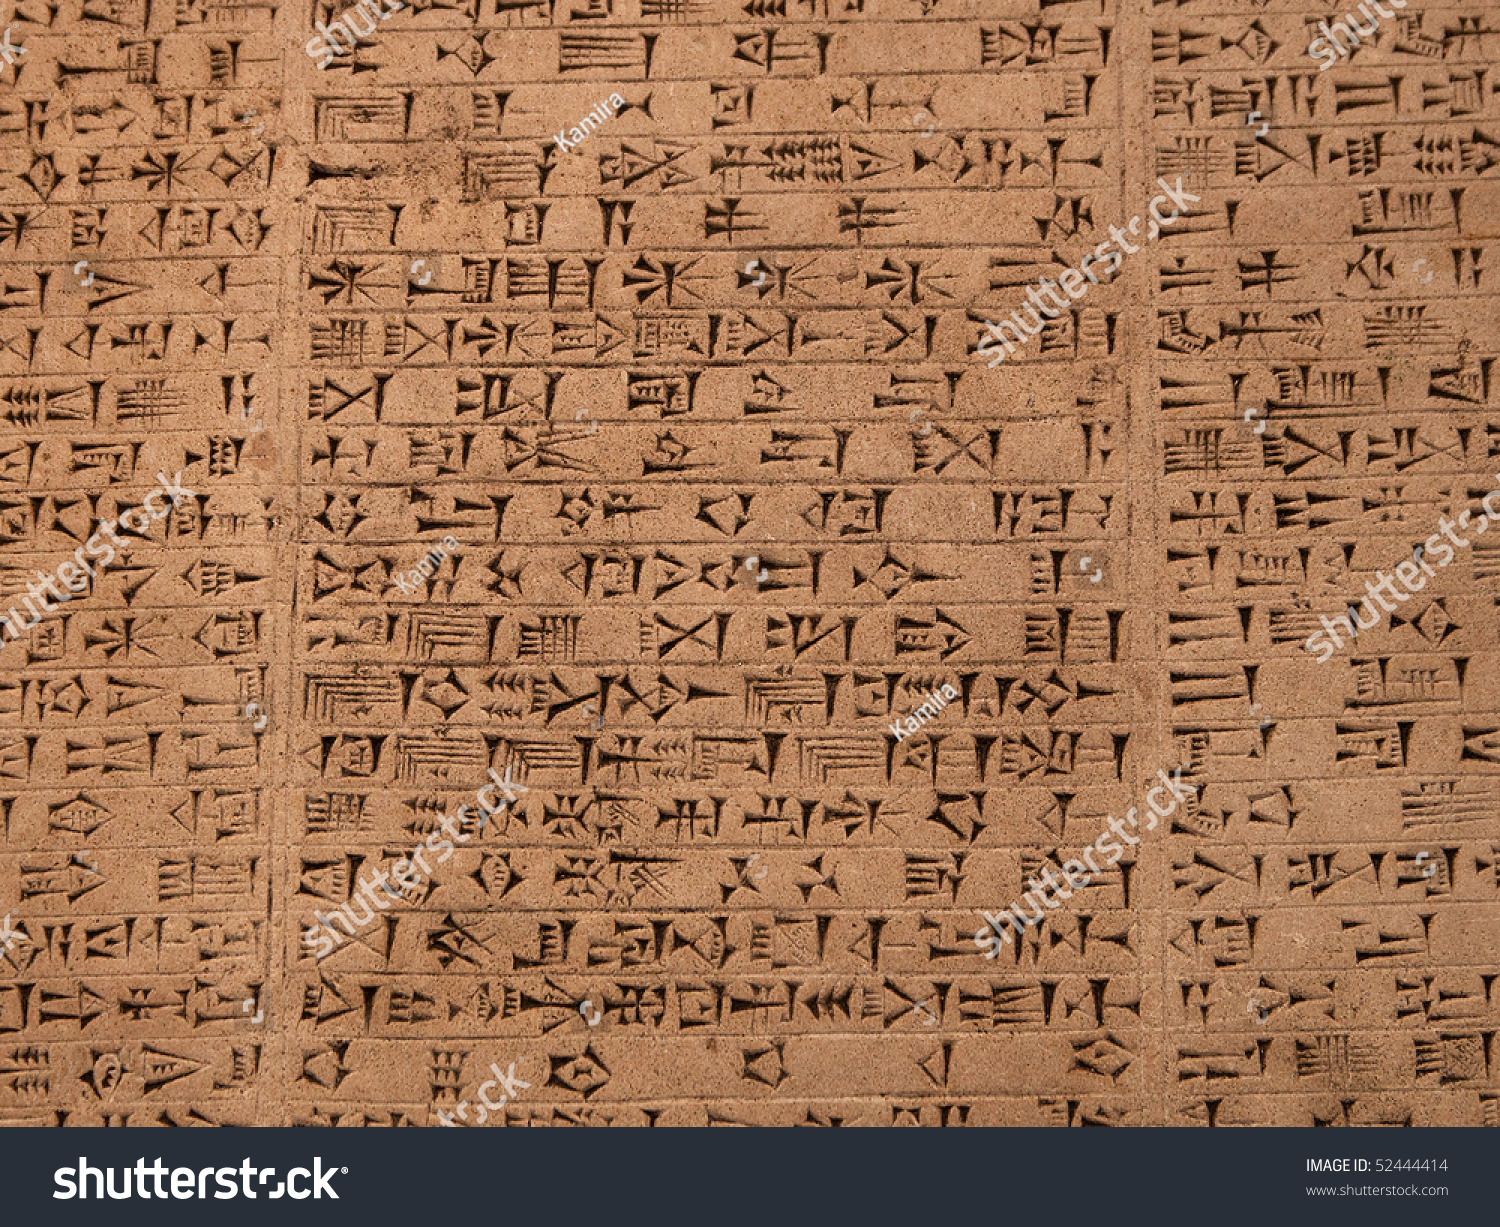 Tablet with cuneiform writing of the ancient Sumerian  or Assyrian civilization in Iraq #52444414